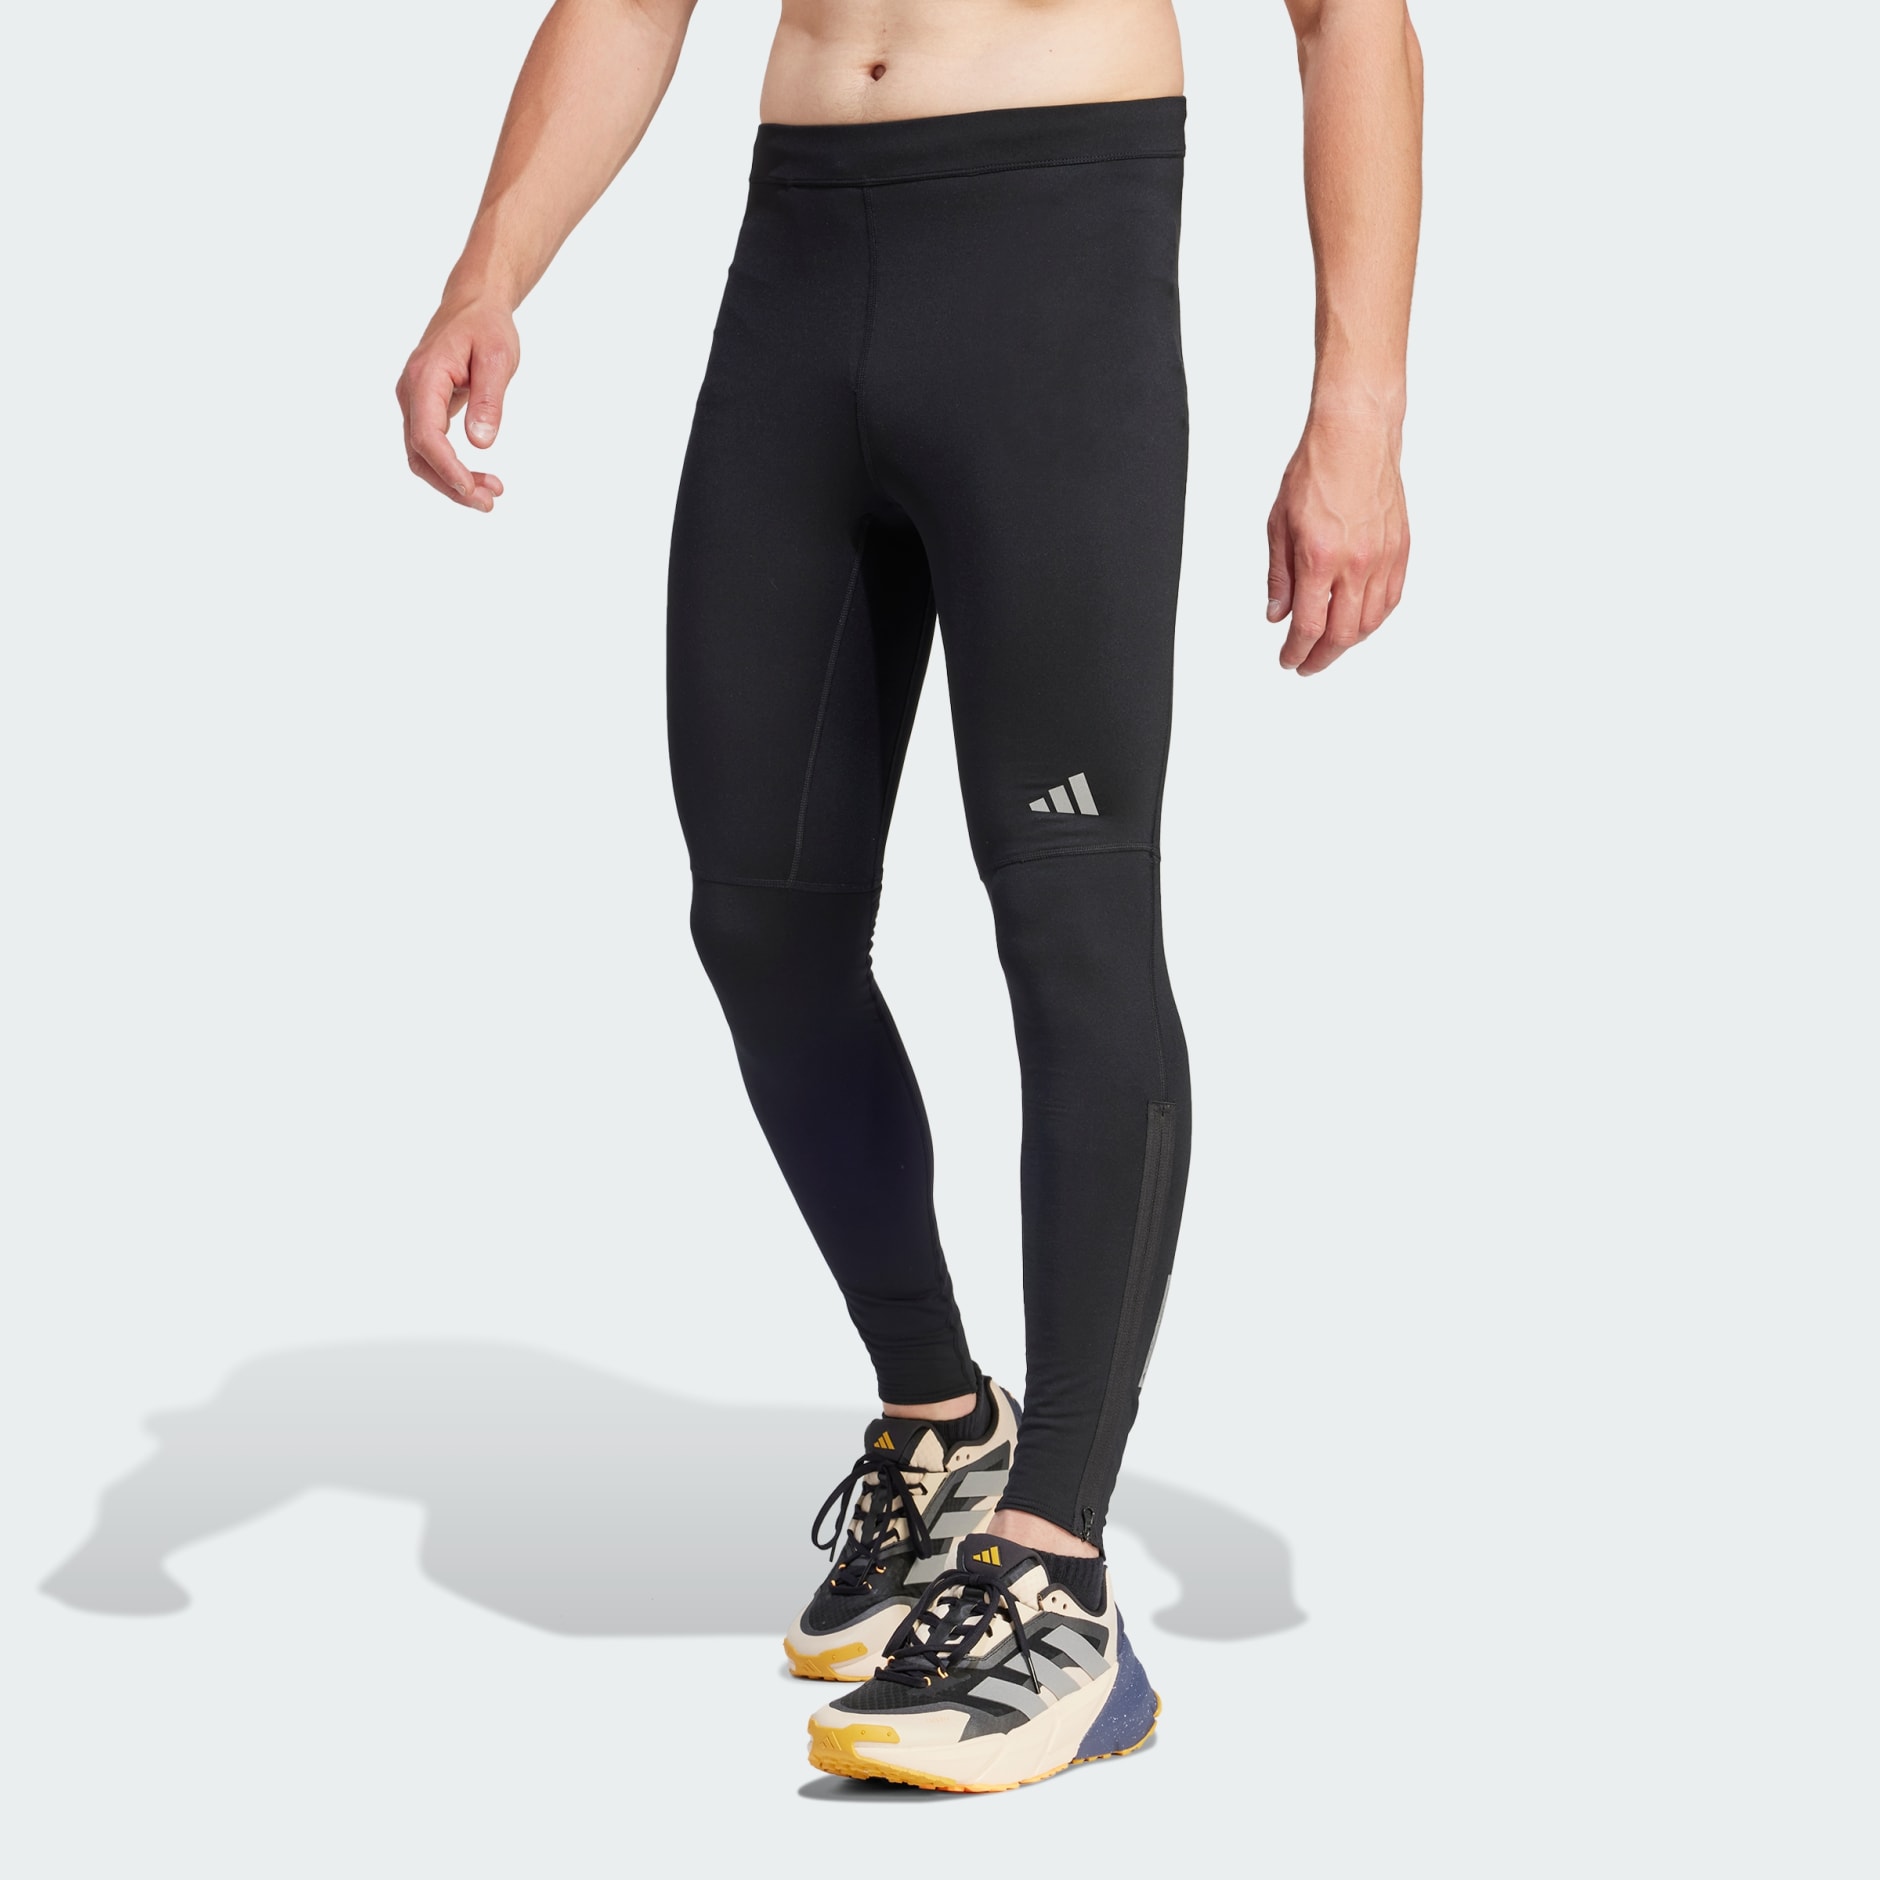 Men's Clothing - Ultimate Running Conquer the Elements AEROREADY Warming  Leggings - Black